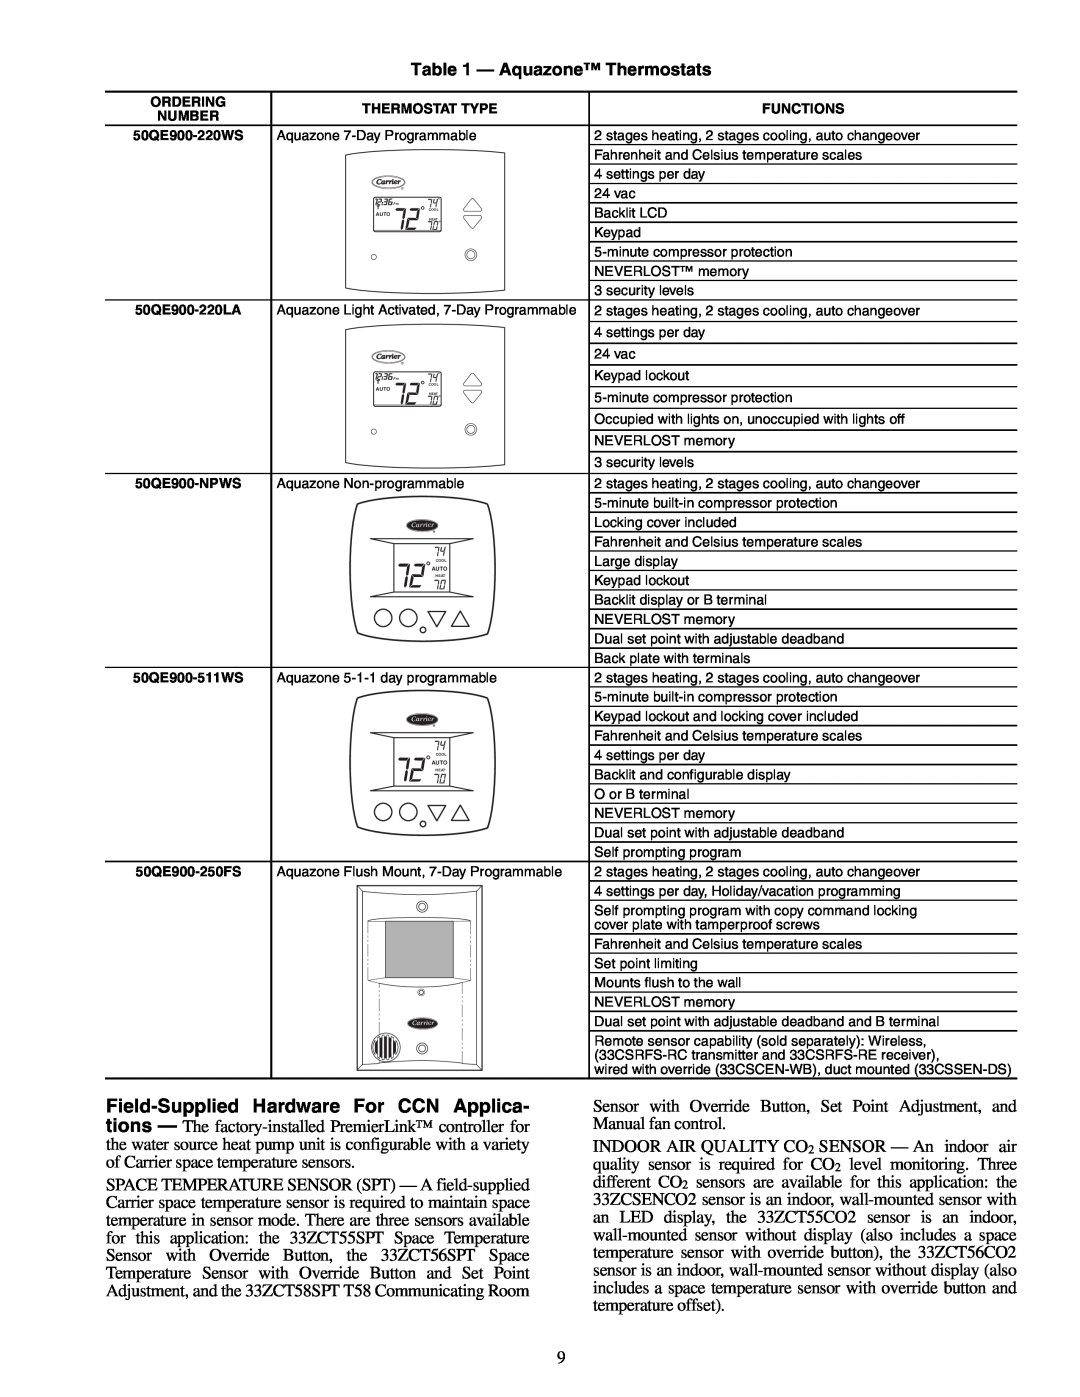 Carrier 50RLP installation instructions Field-SuppliedHardware For CCN Applica, Aquazone Thermostats 